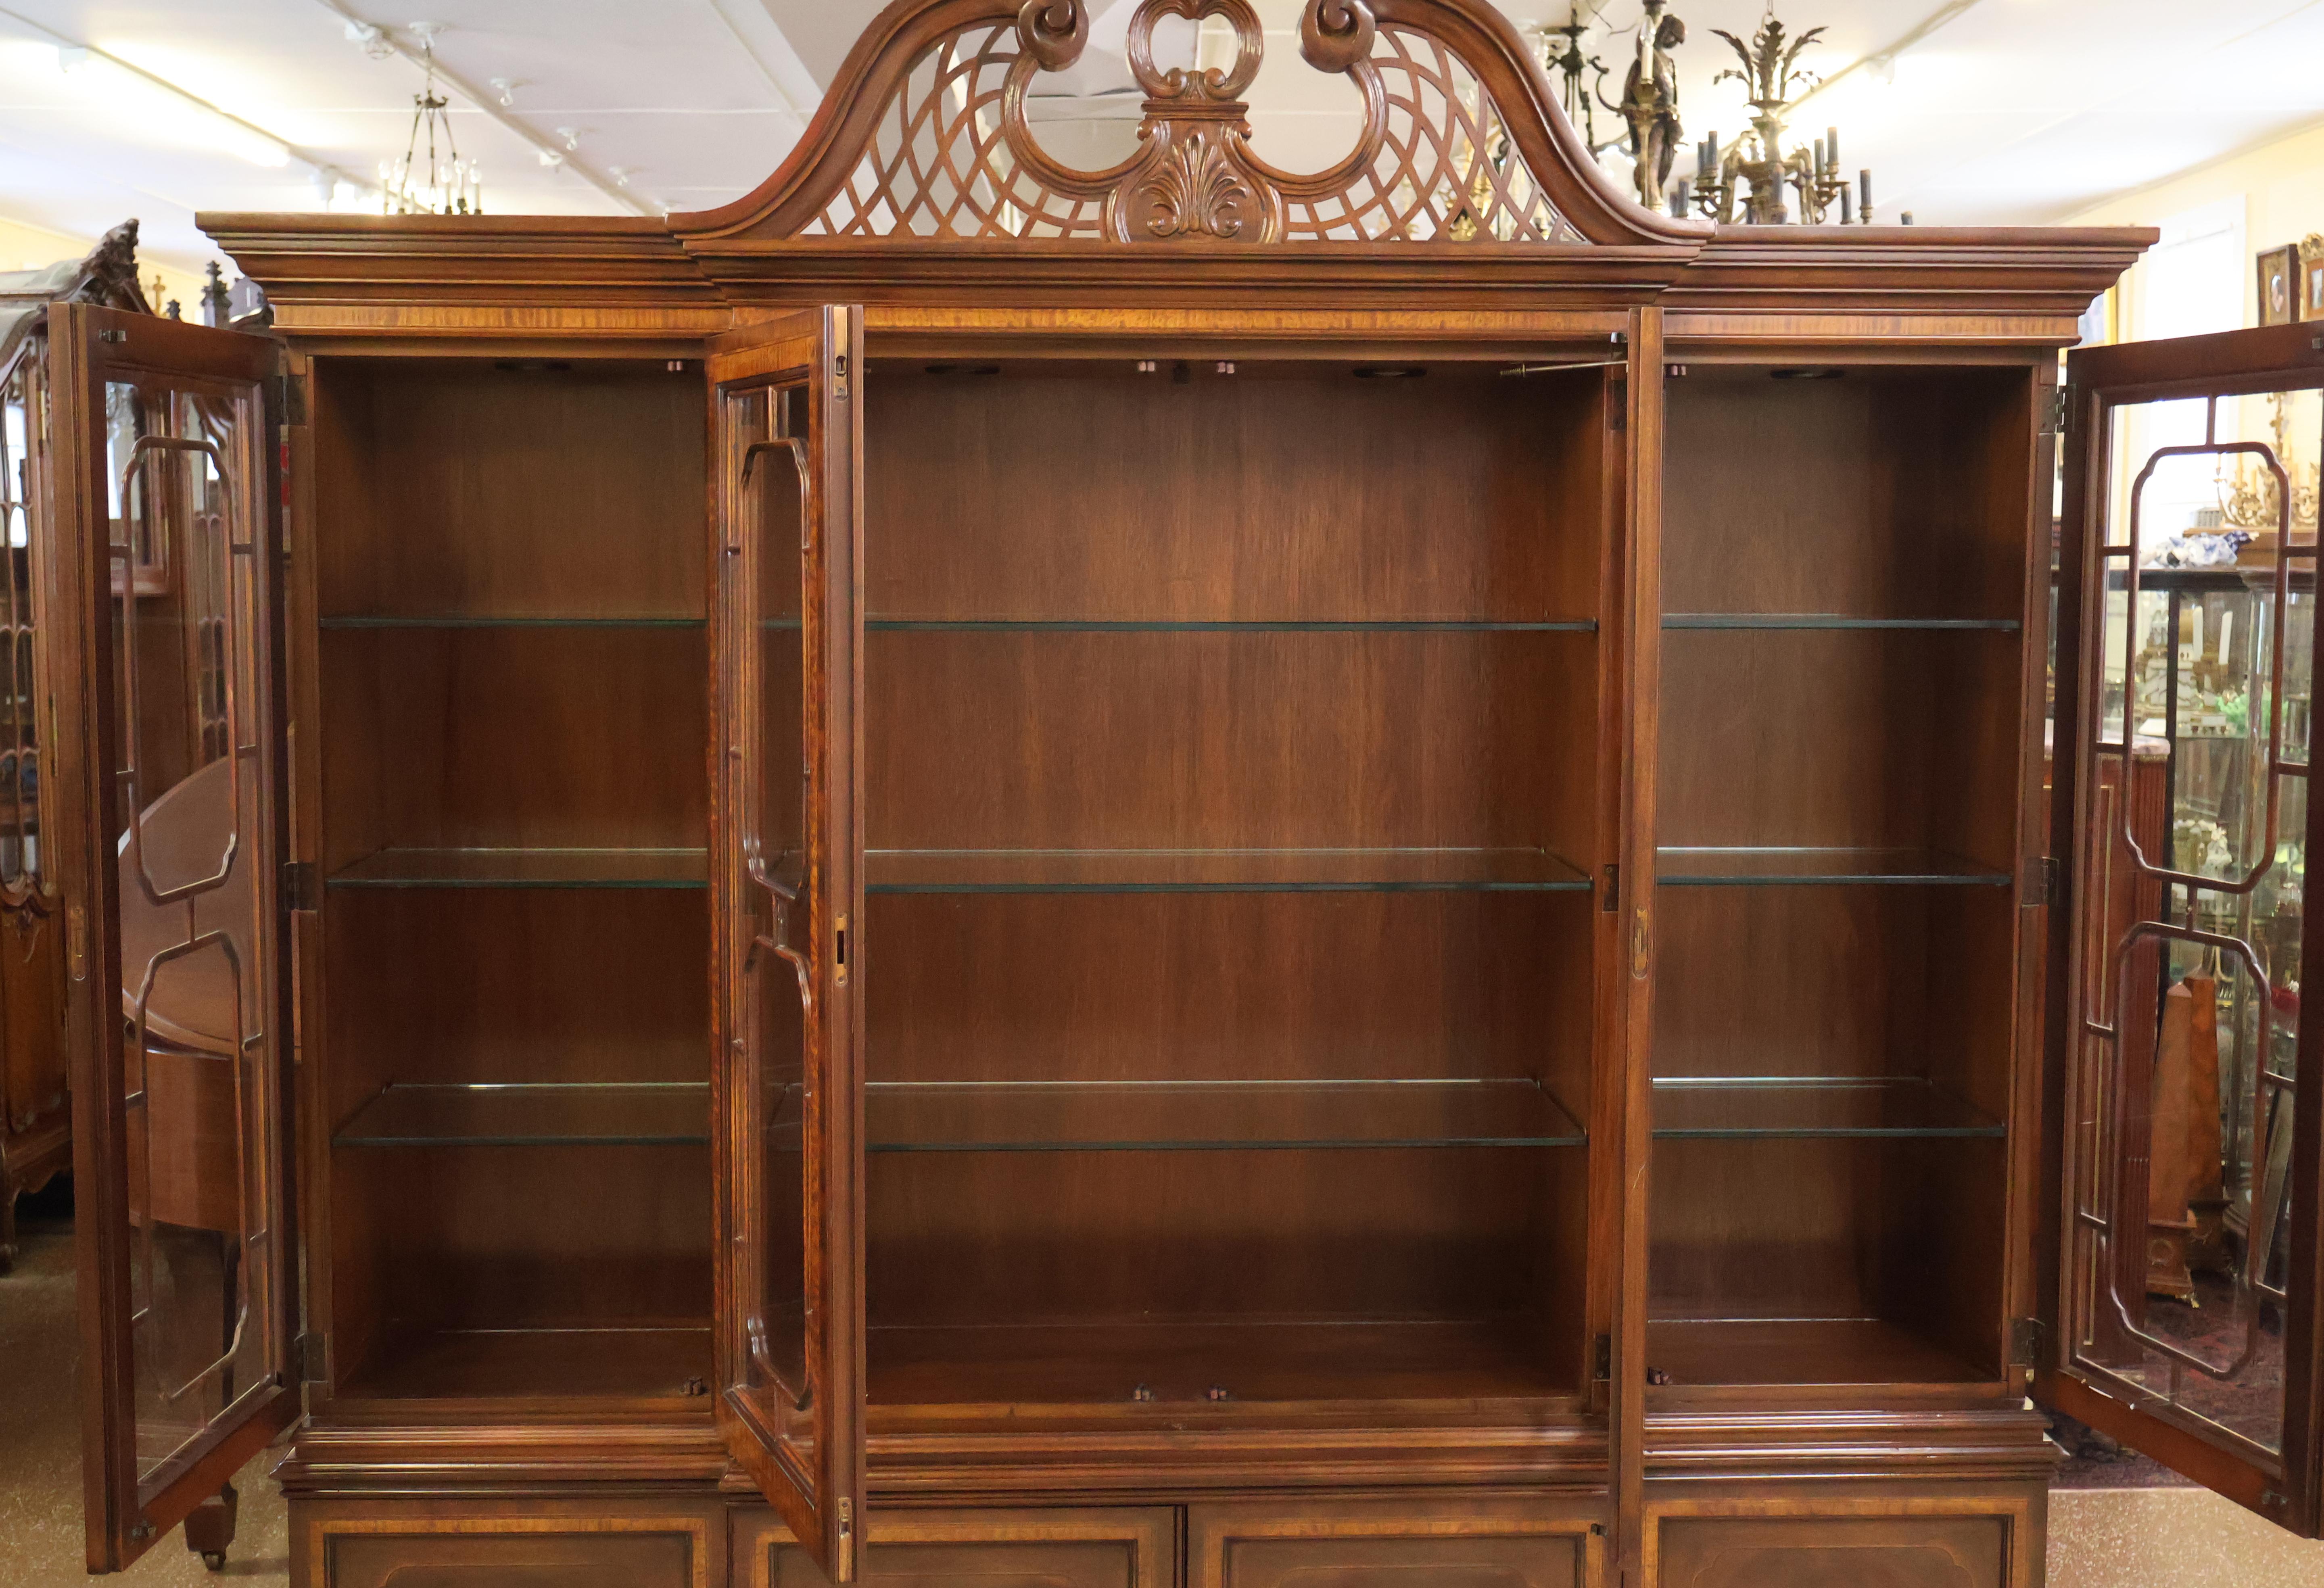 Flame Mahogany Heritage Heirlooms Drexel Bookcase China Cabinet Breakfront In Good Condition For Sale In Long Branch, NJ